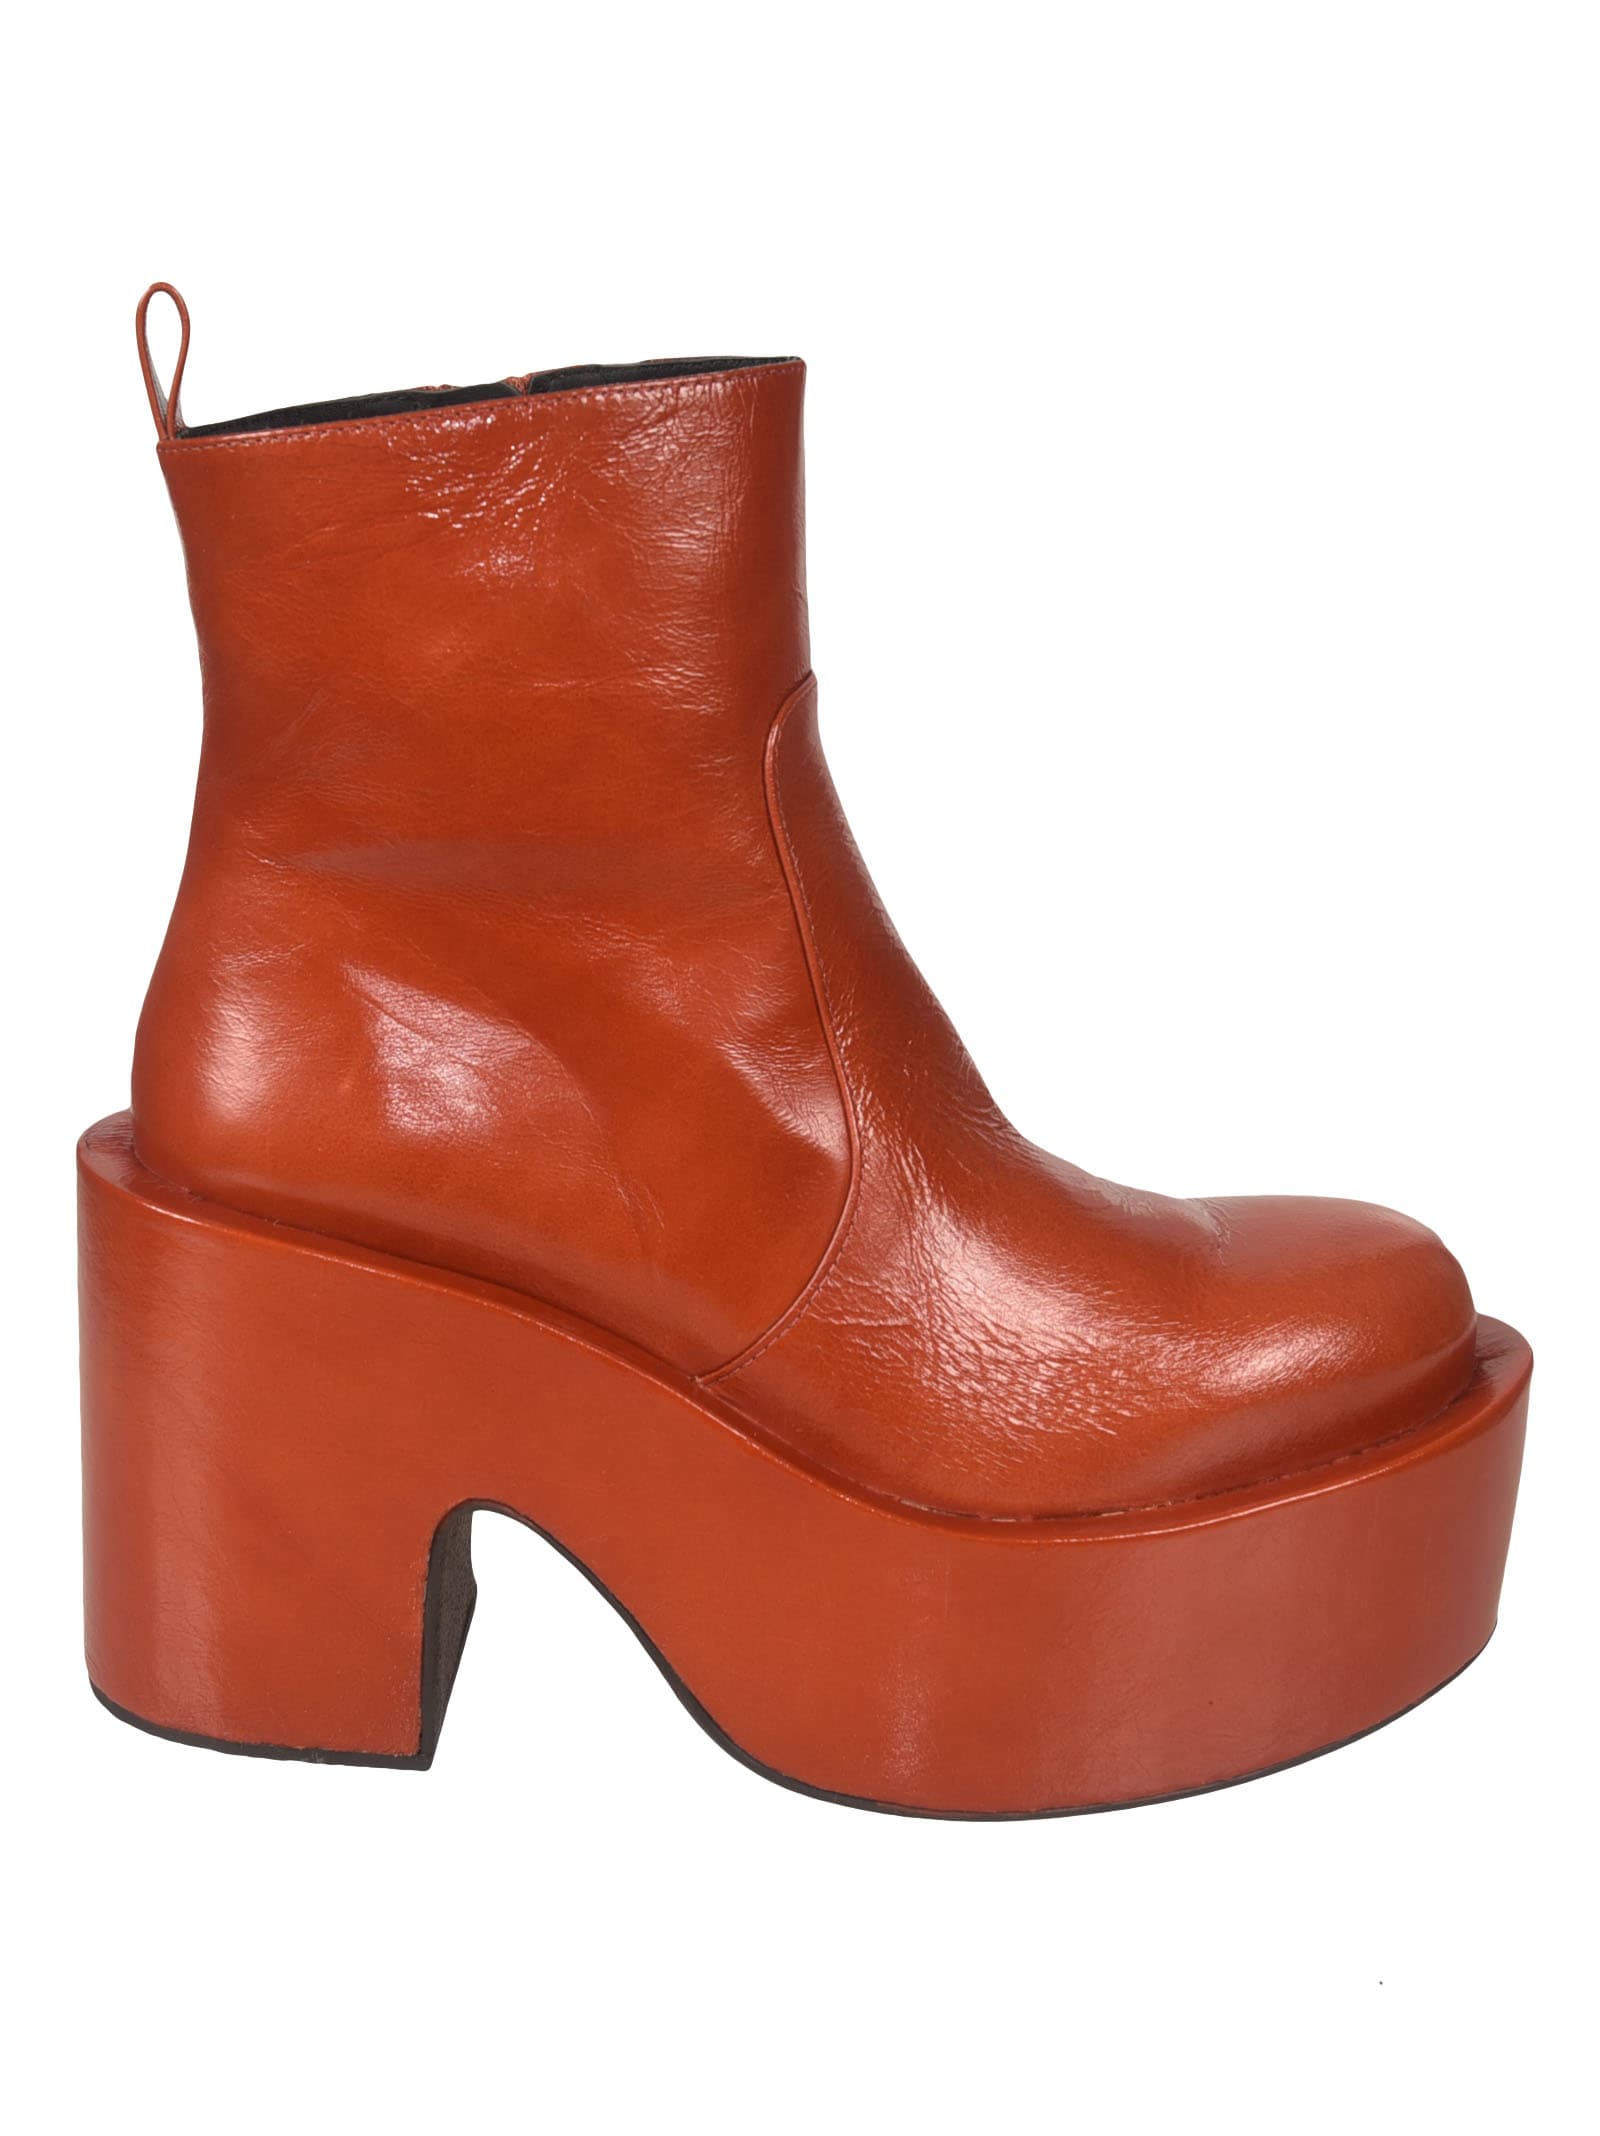 Paloma Barceló Side Zip High Block Heel Ankle Boots